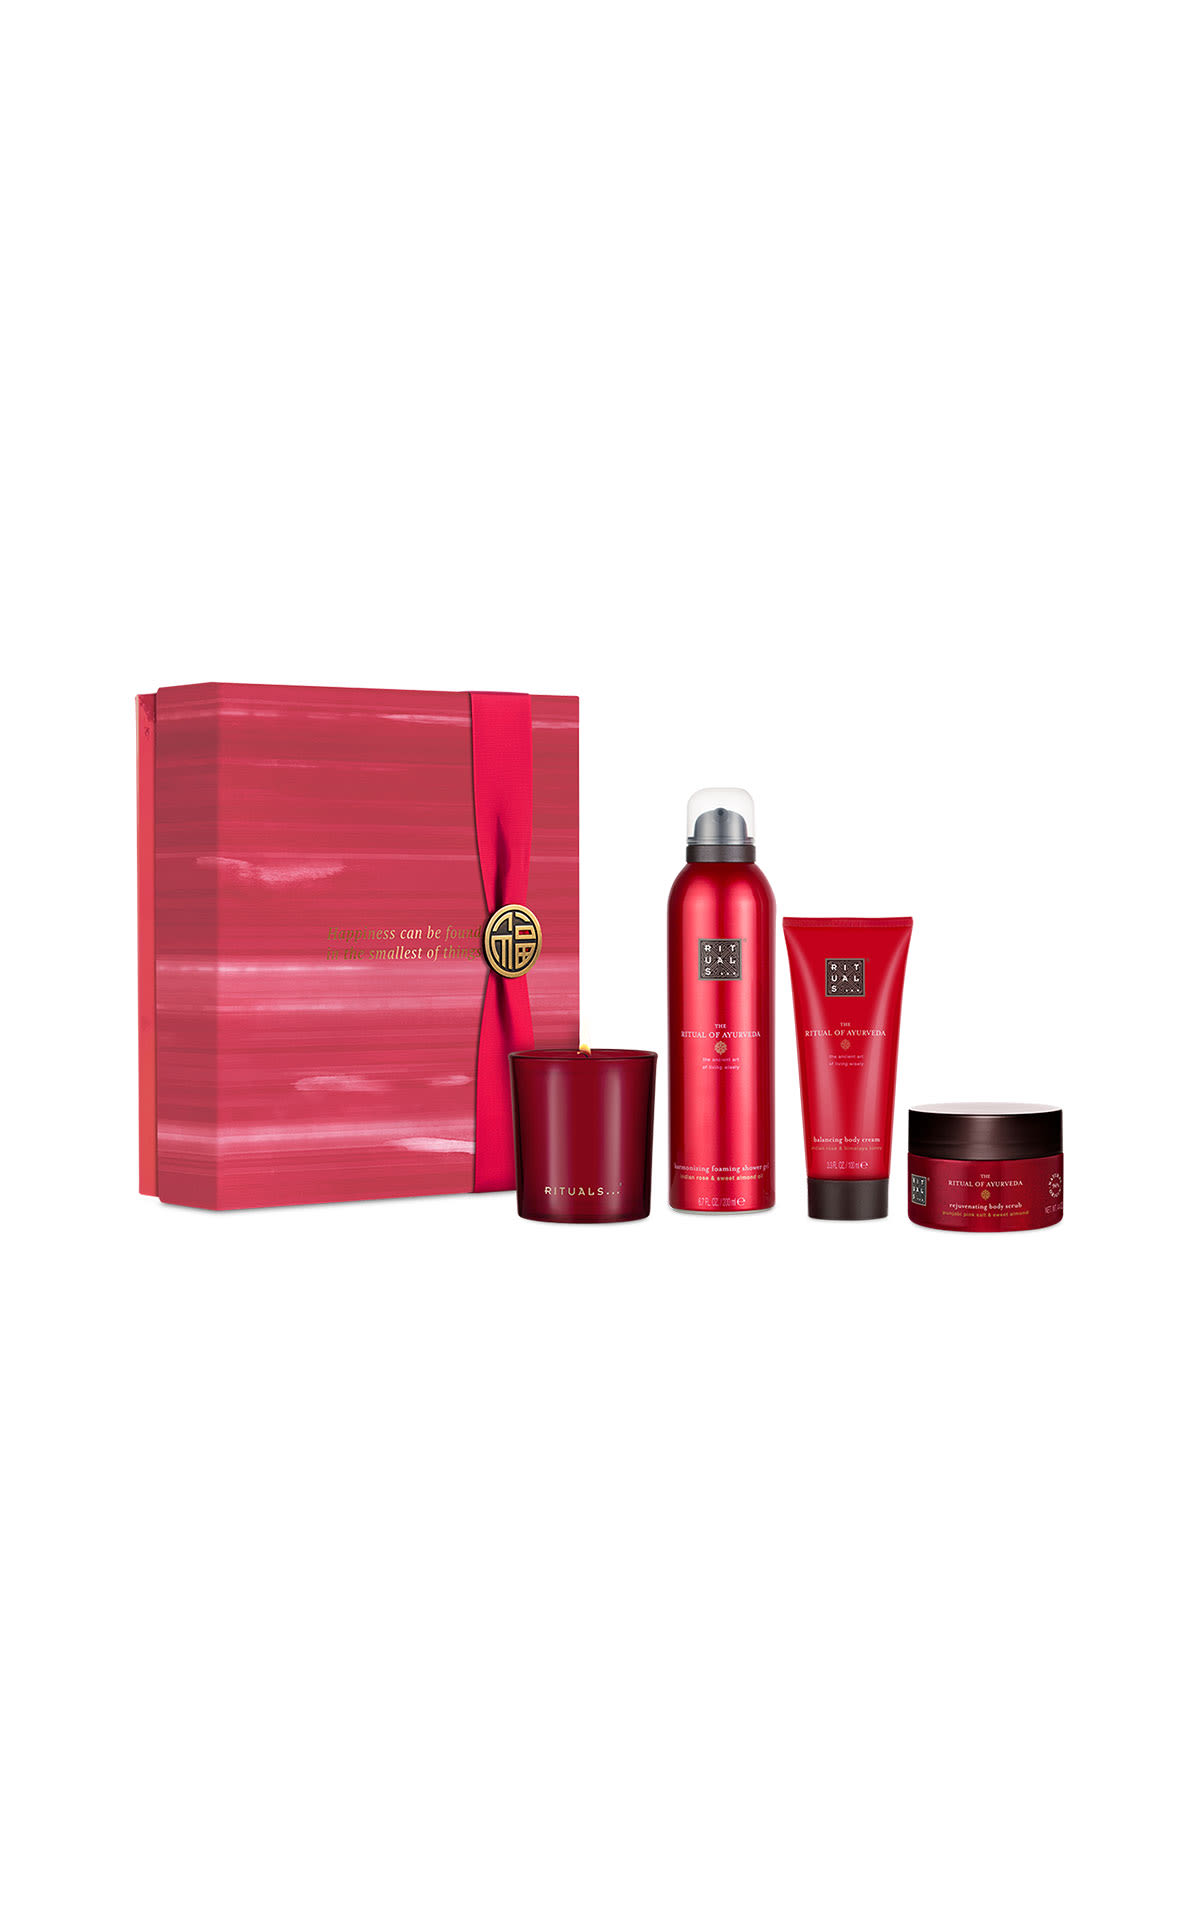 Rituals The Ritual of Ayurveda medium gift set from Bicester Village